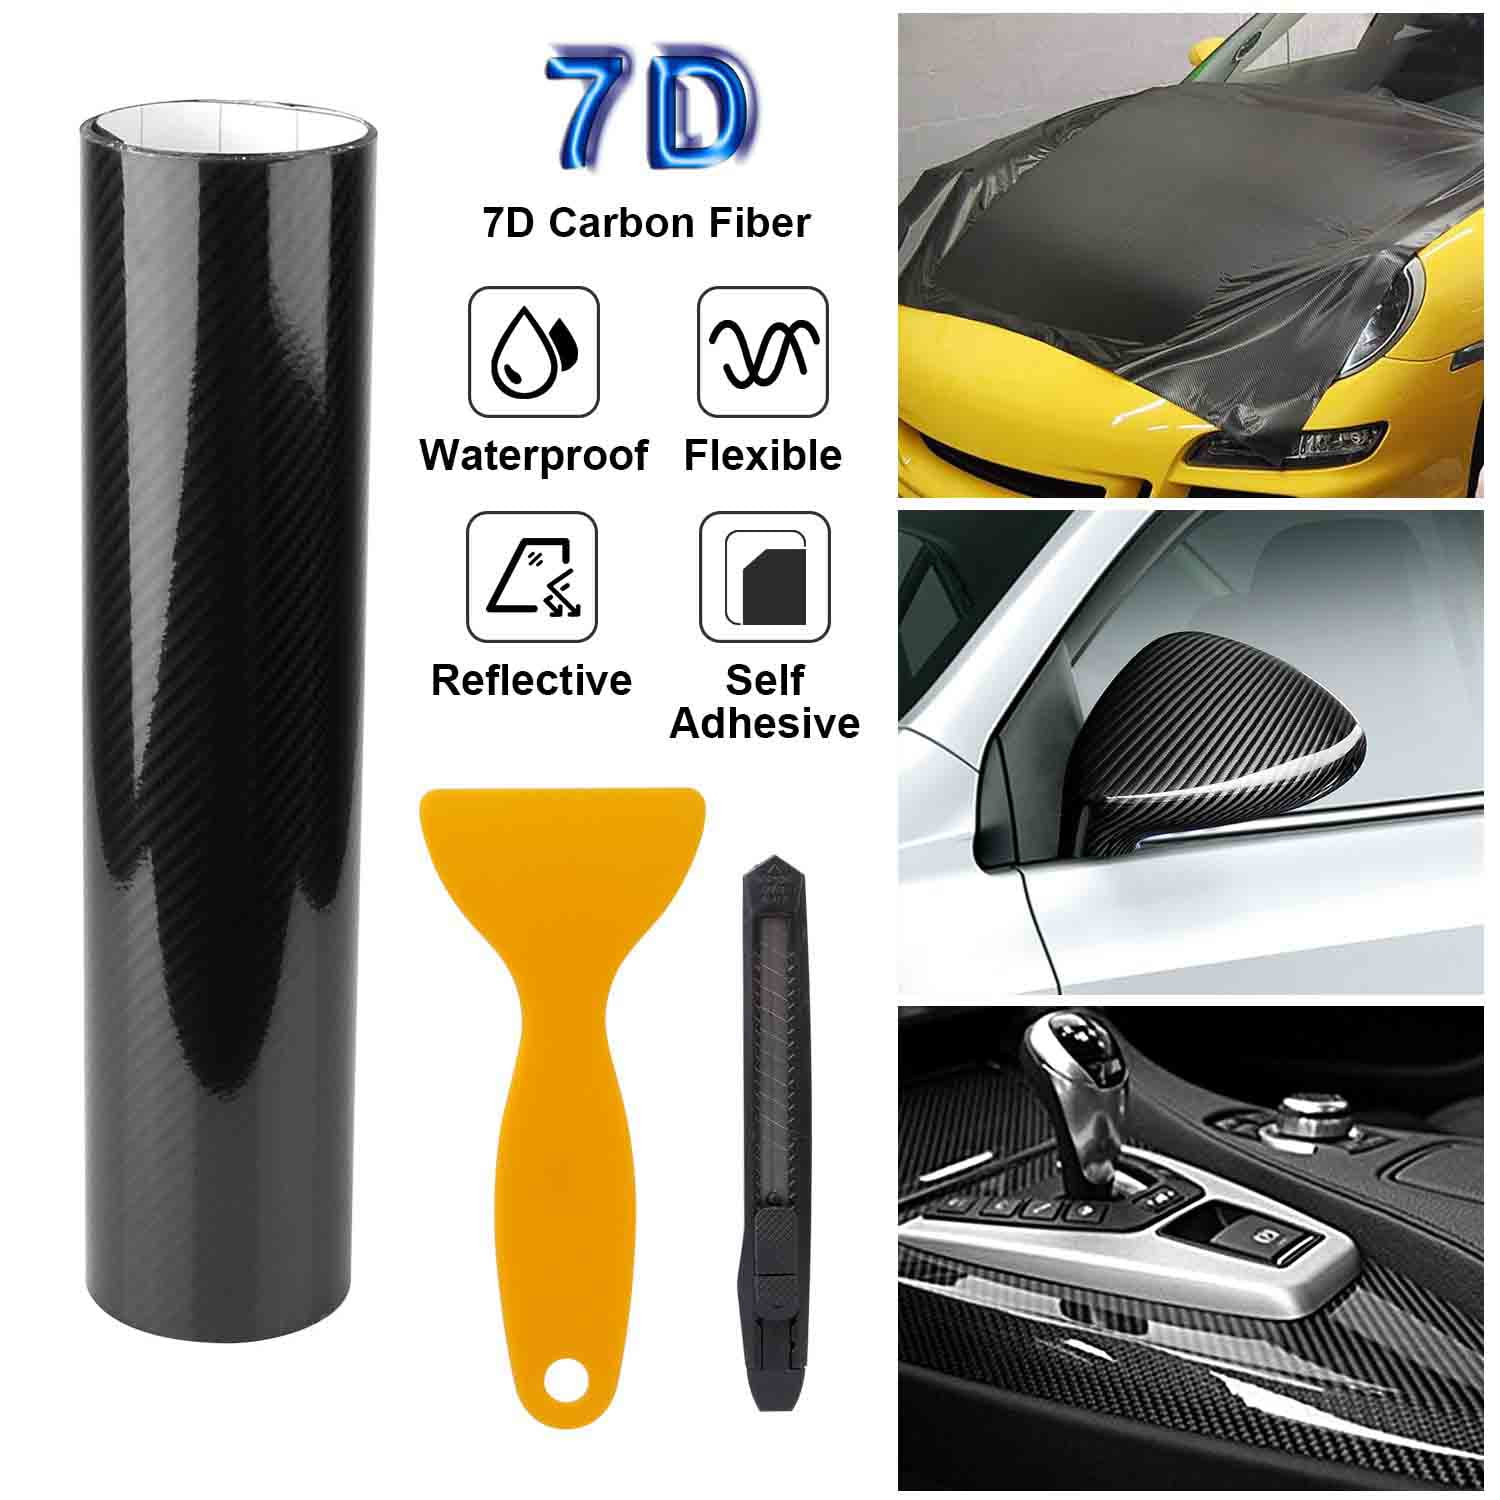 Dropship Black 7D Carbon Fiber Car Wrap High Gloss Vinyl Wrap Film Roll  Bubble Free Air Release For Cars Laptops Phones to Sell Online at a Lower  Price